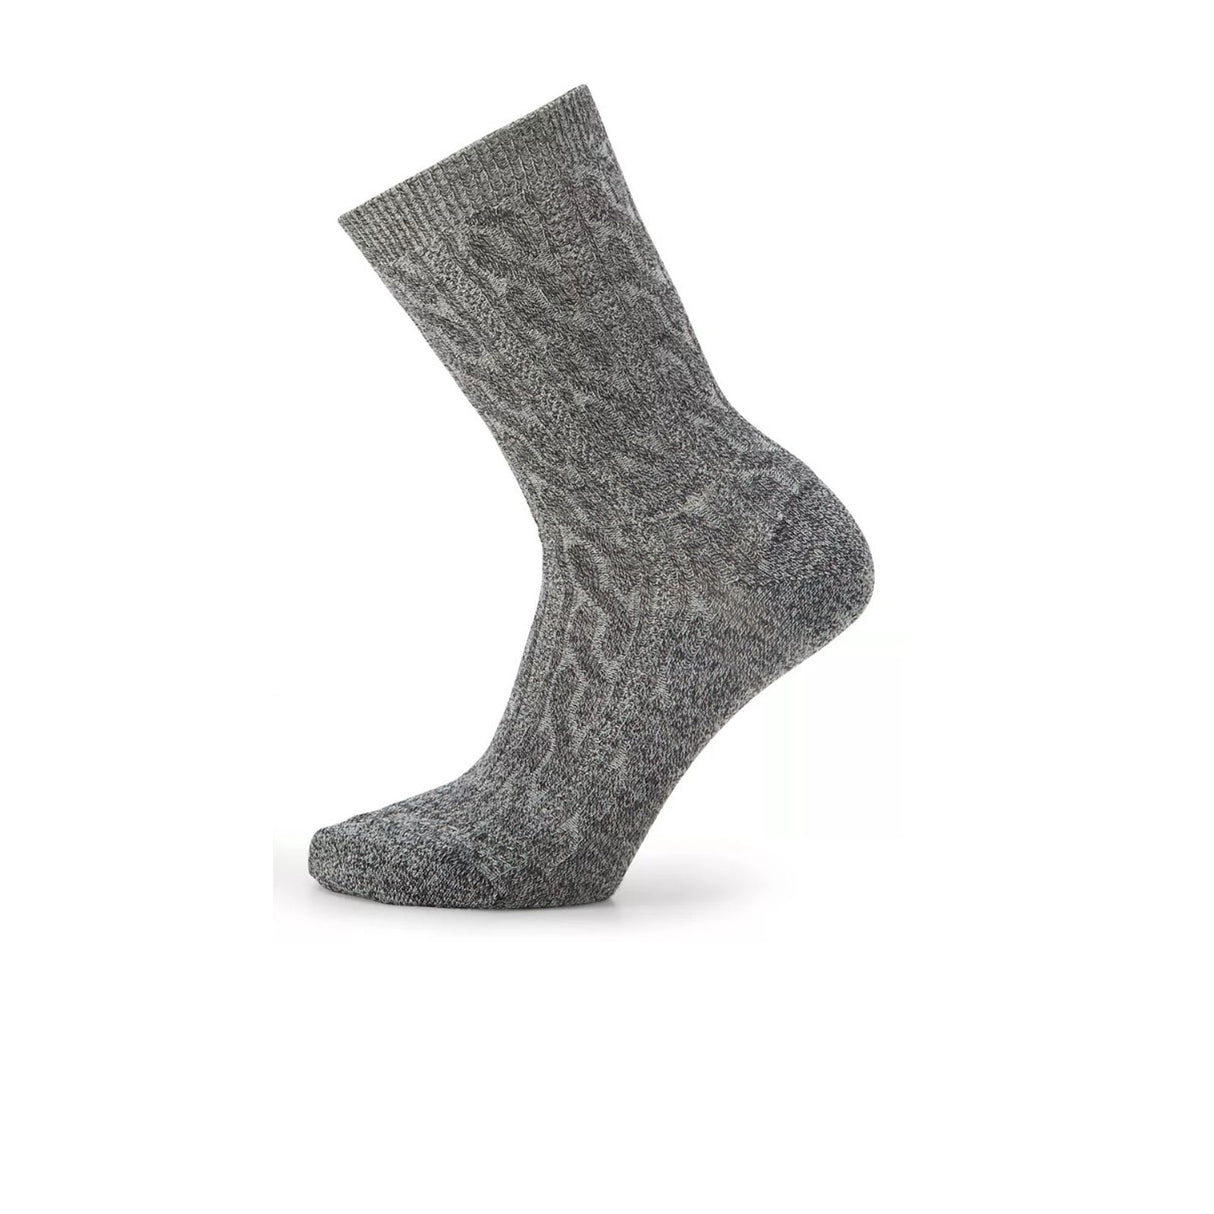 Smartwool Everyday Cable Crew Sock (Women) - Natural Accessories - Socks - Lifestyle - The Heel Shoe Fitters